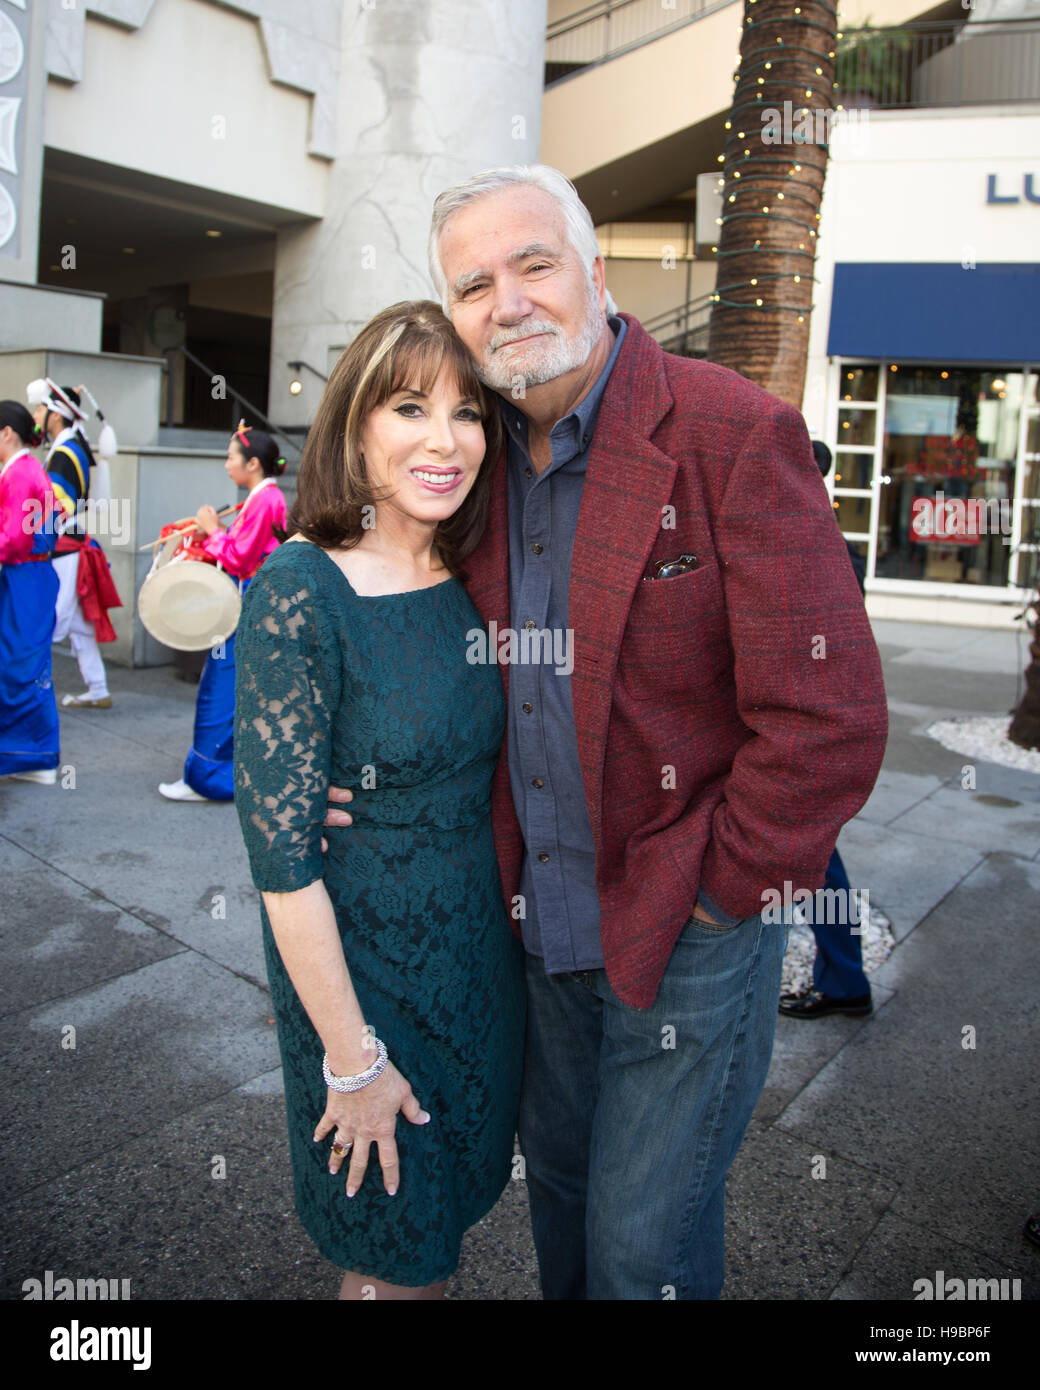 Hollywood, California, USA. 21st November, 2016. Actress Kate Linder and actor John McCook attend the press conference for the 85th Annual Hollywood Christmas Parade held at the Hollywood & Highland Center in Hollywood, California, USA.  Credit:  Sheri Determan / Alamy Live News Stock Photo